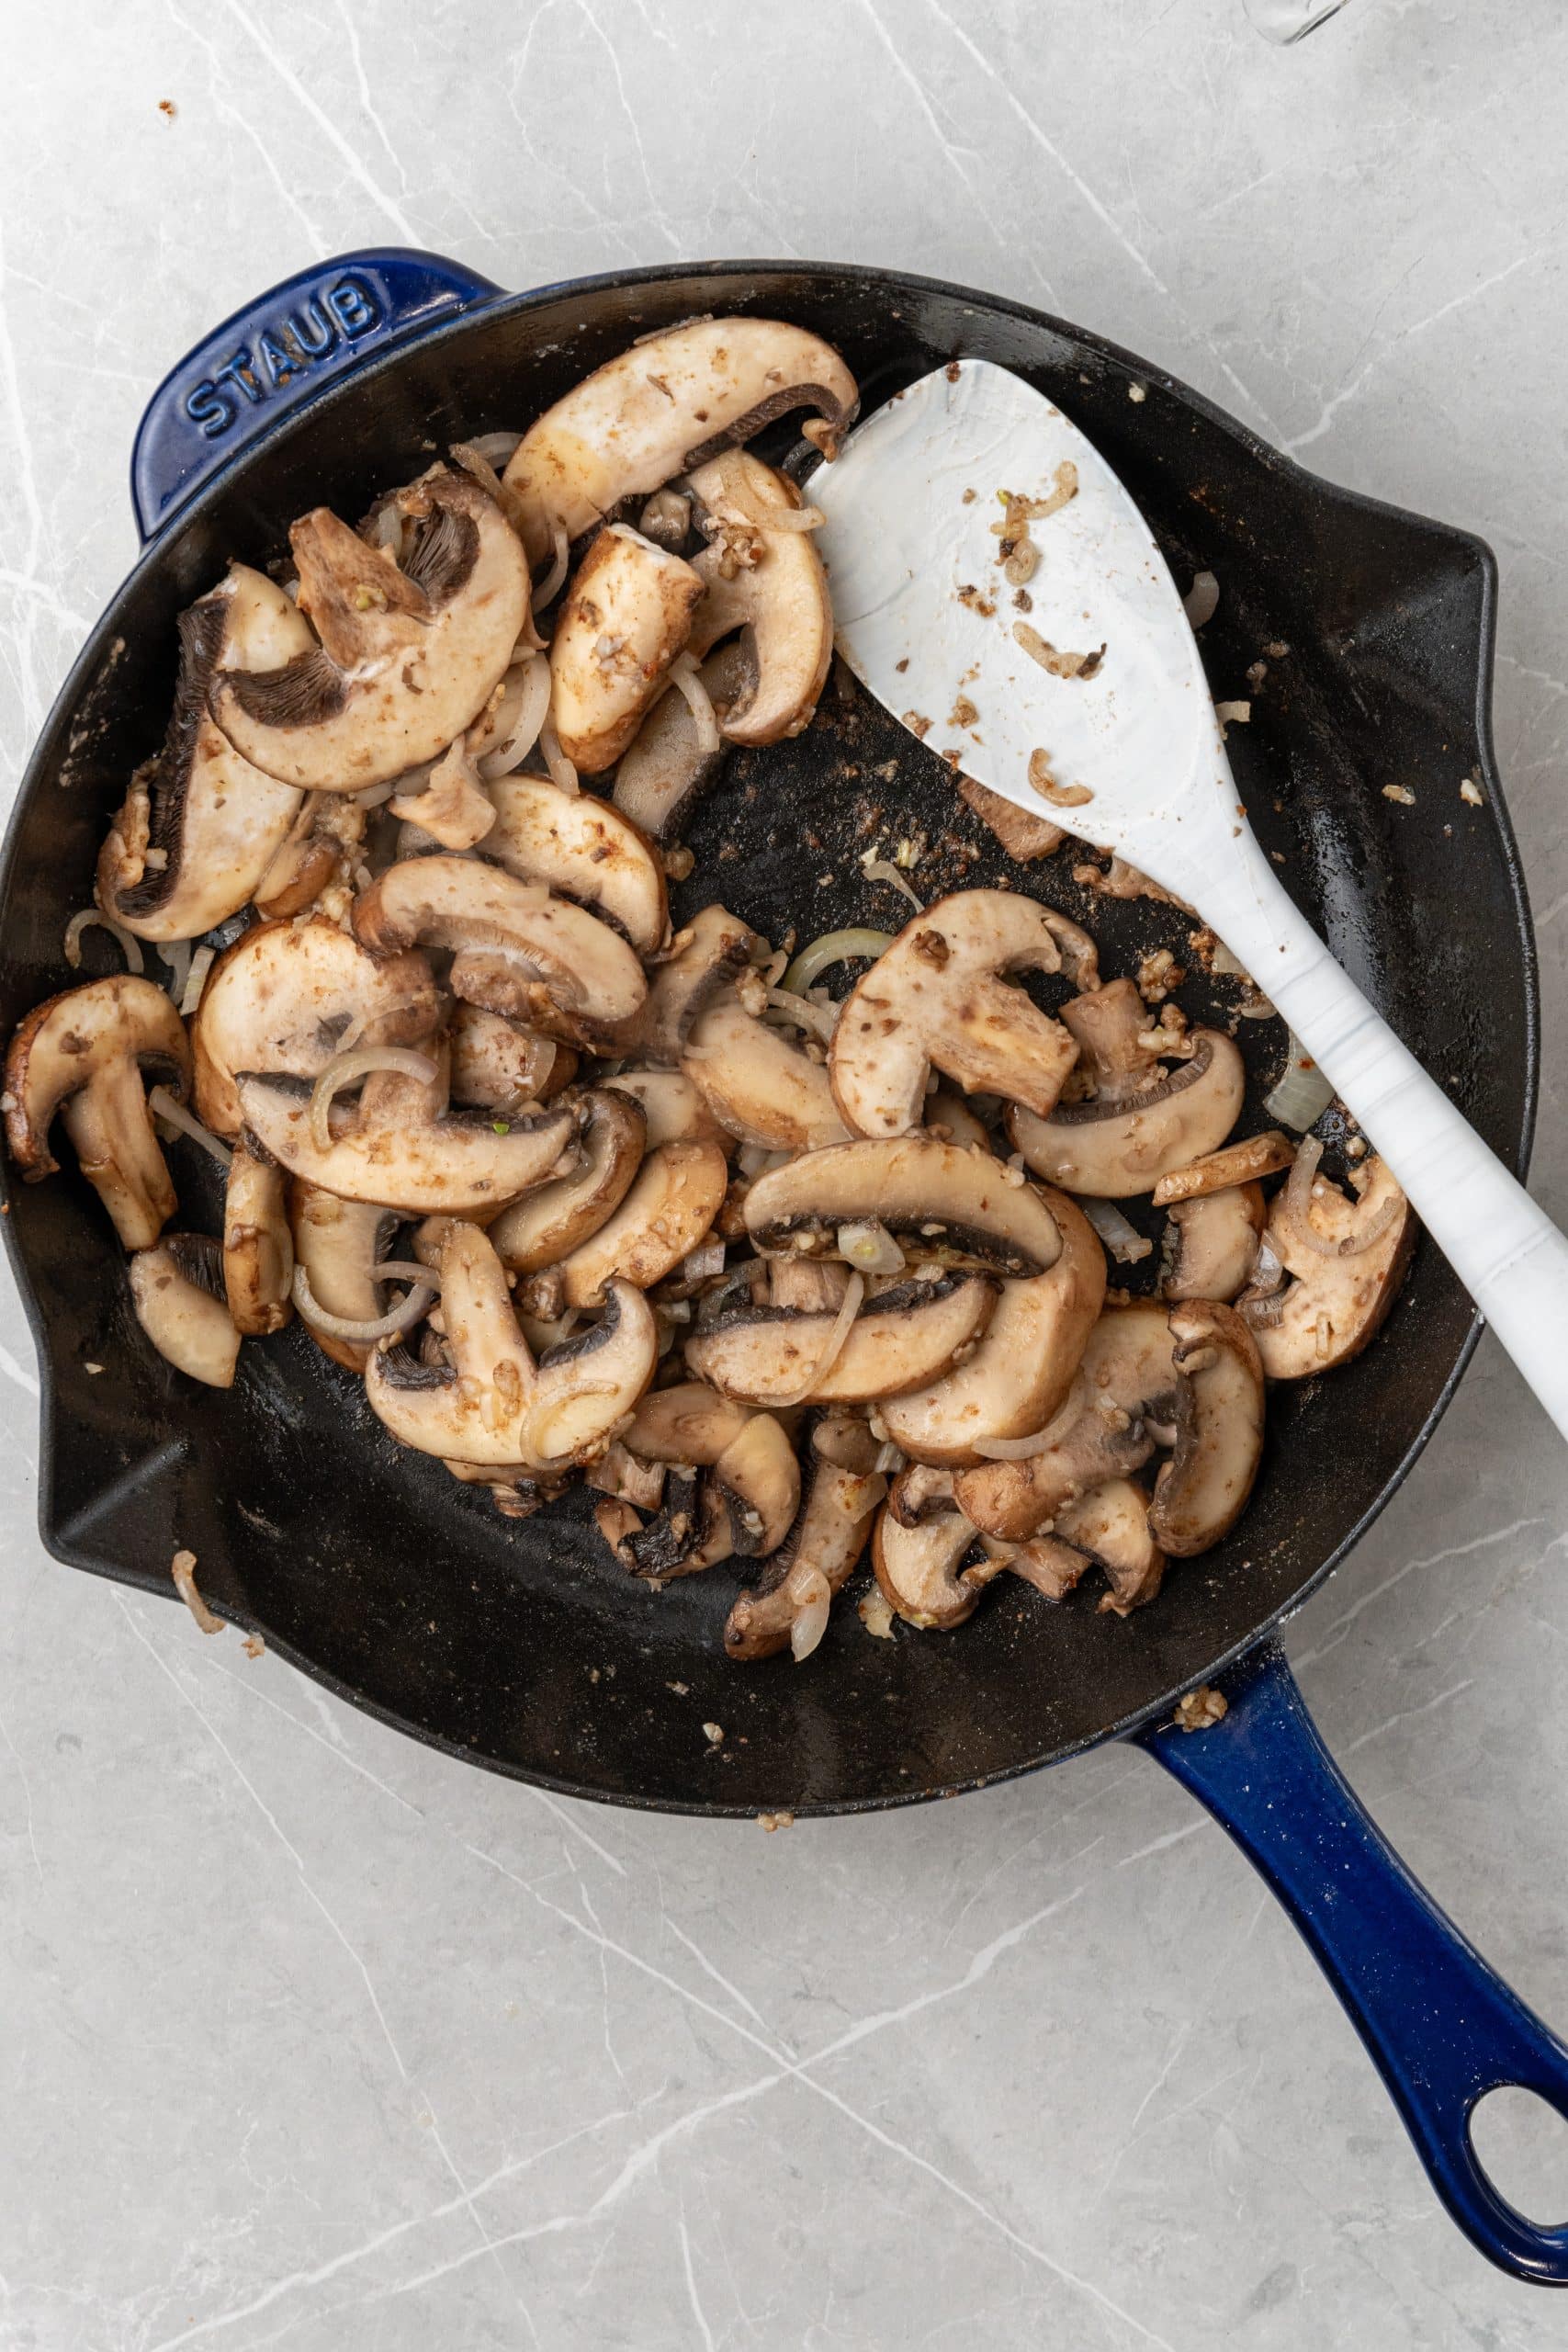 sliced onions and mushrooms cooking in butter in a cast iron skillet